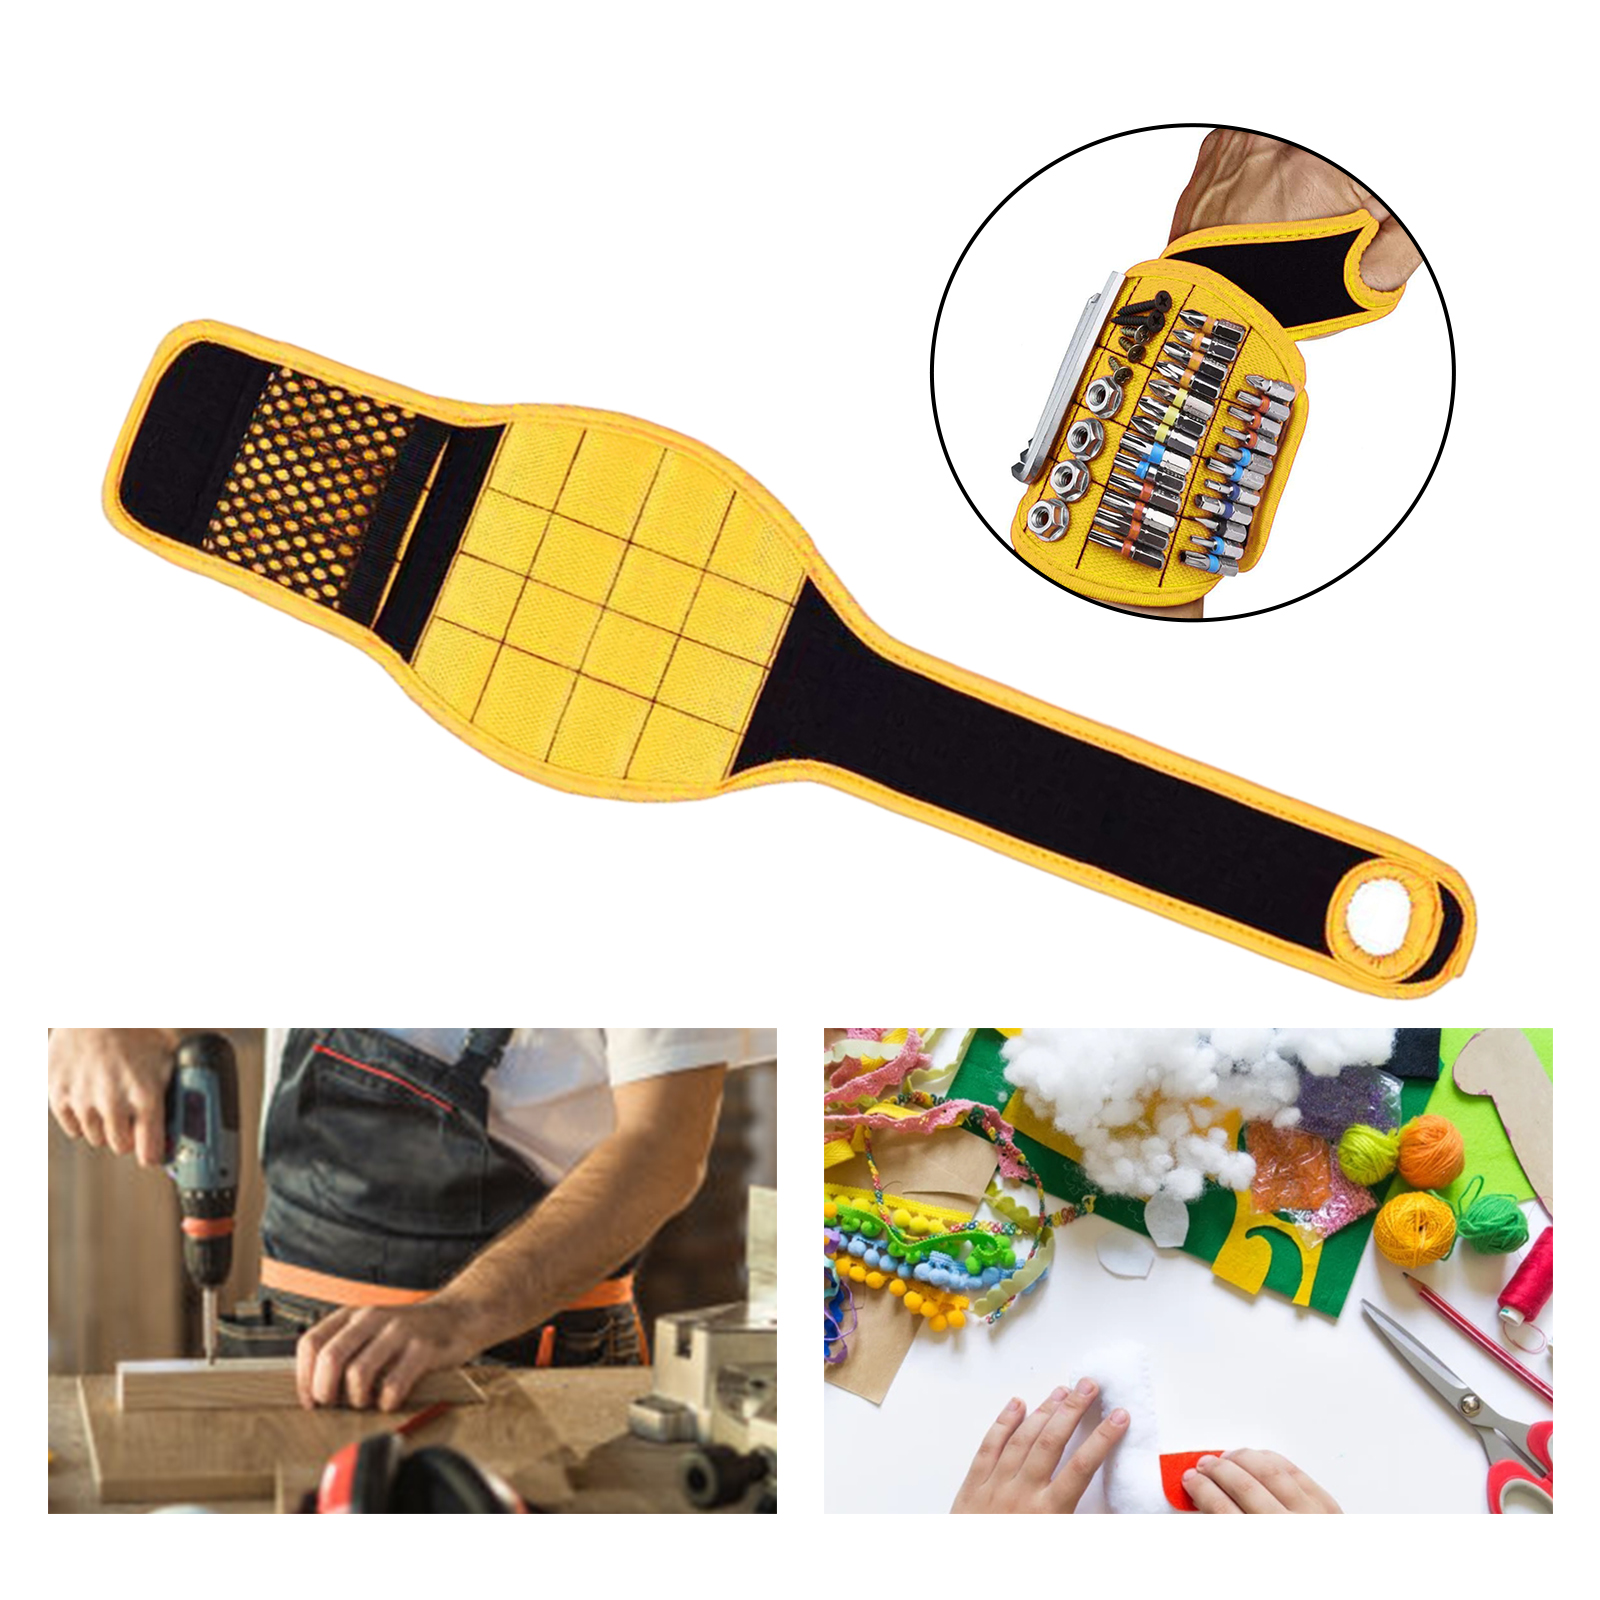 Magnetic Wristband Tool Belt for Holder Holding Screws Cool Gifts Gadgets Yellow